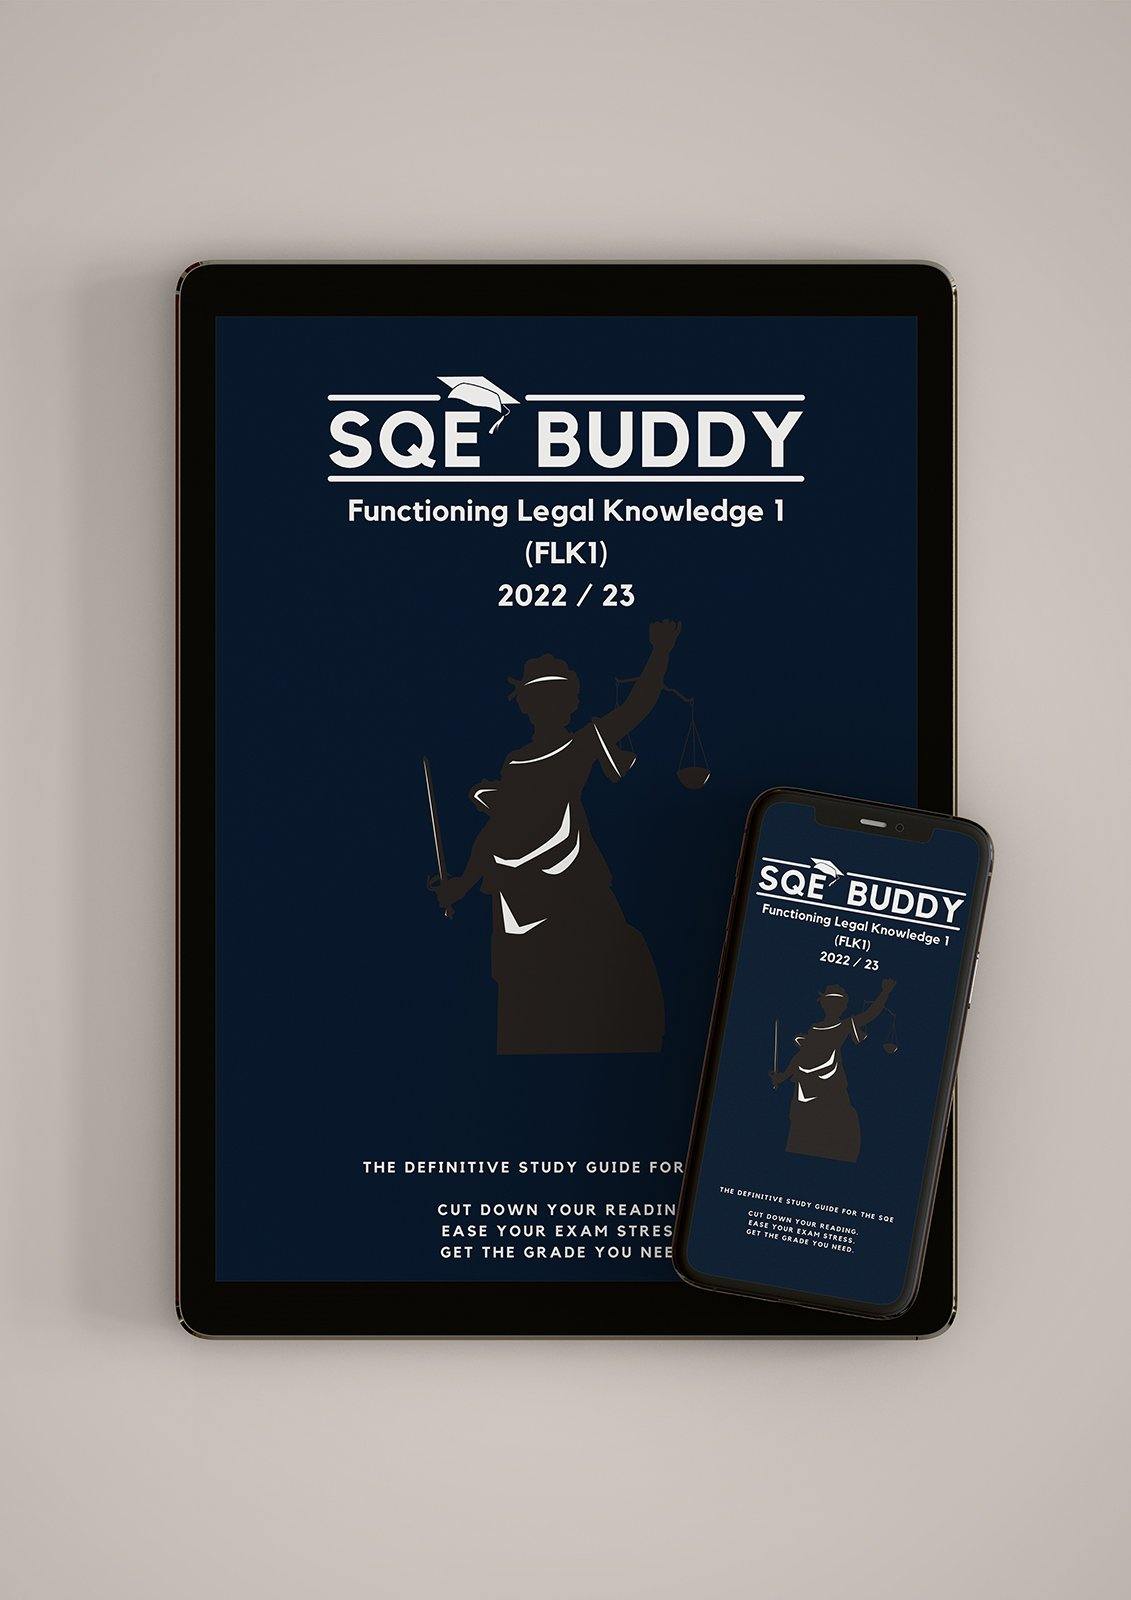 SQE Buddy 2021 / 22 - Guide to Functioning Legal Knowledge 1 (FLK1) (eBook) - LPC Buddy